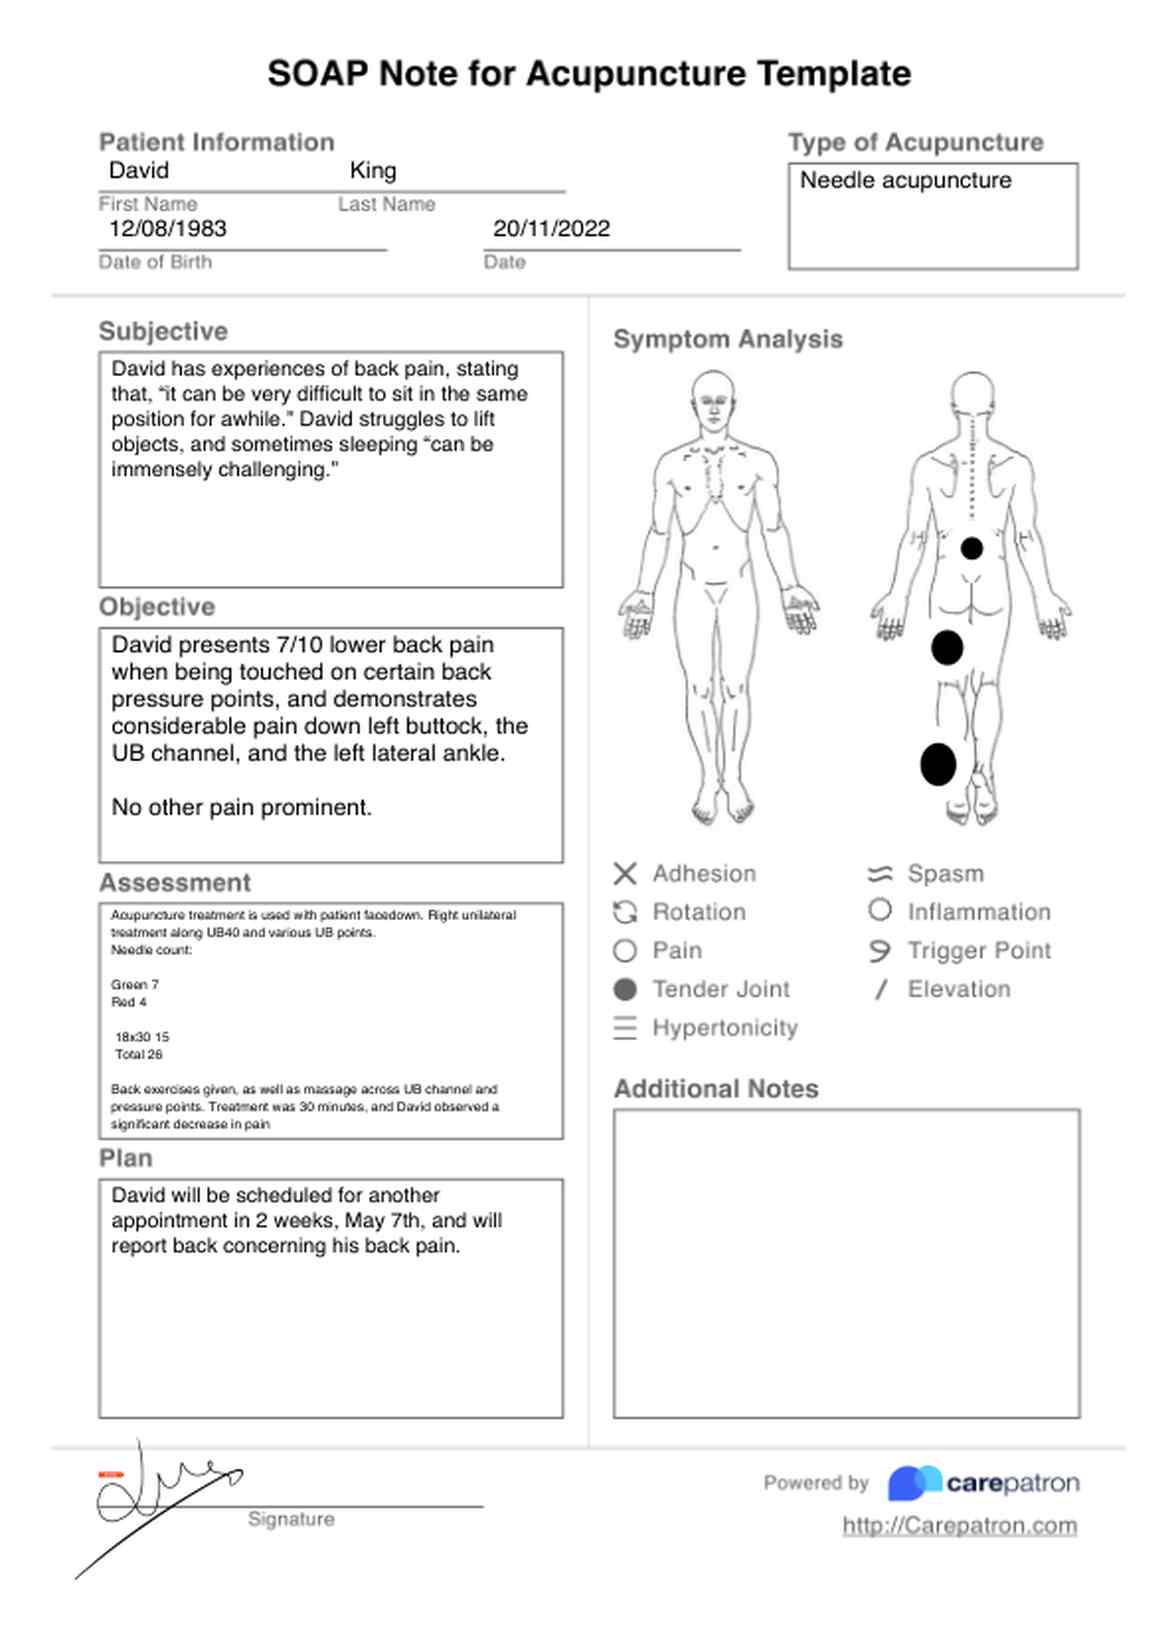 SOAP Notes For Acupuncture Template PDF Example